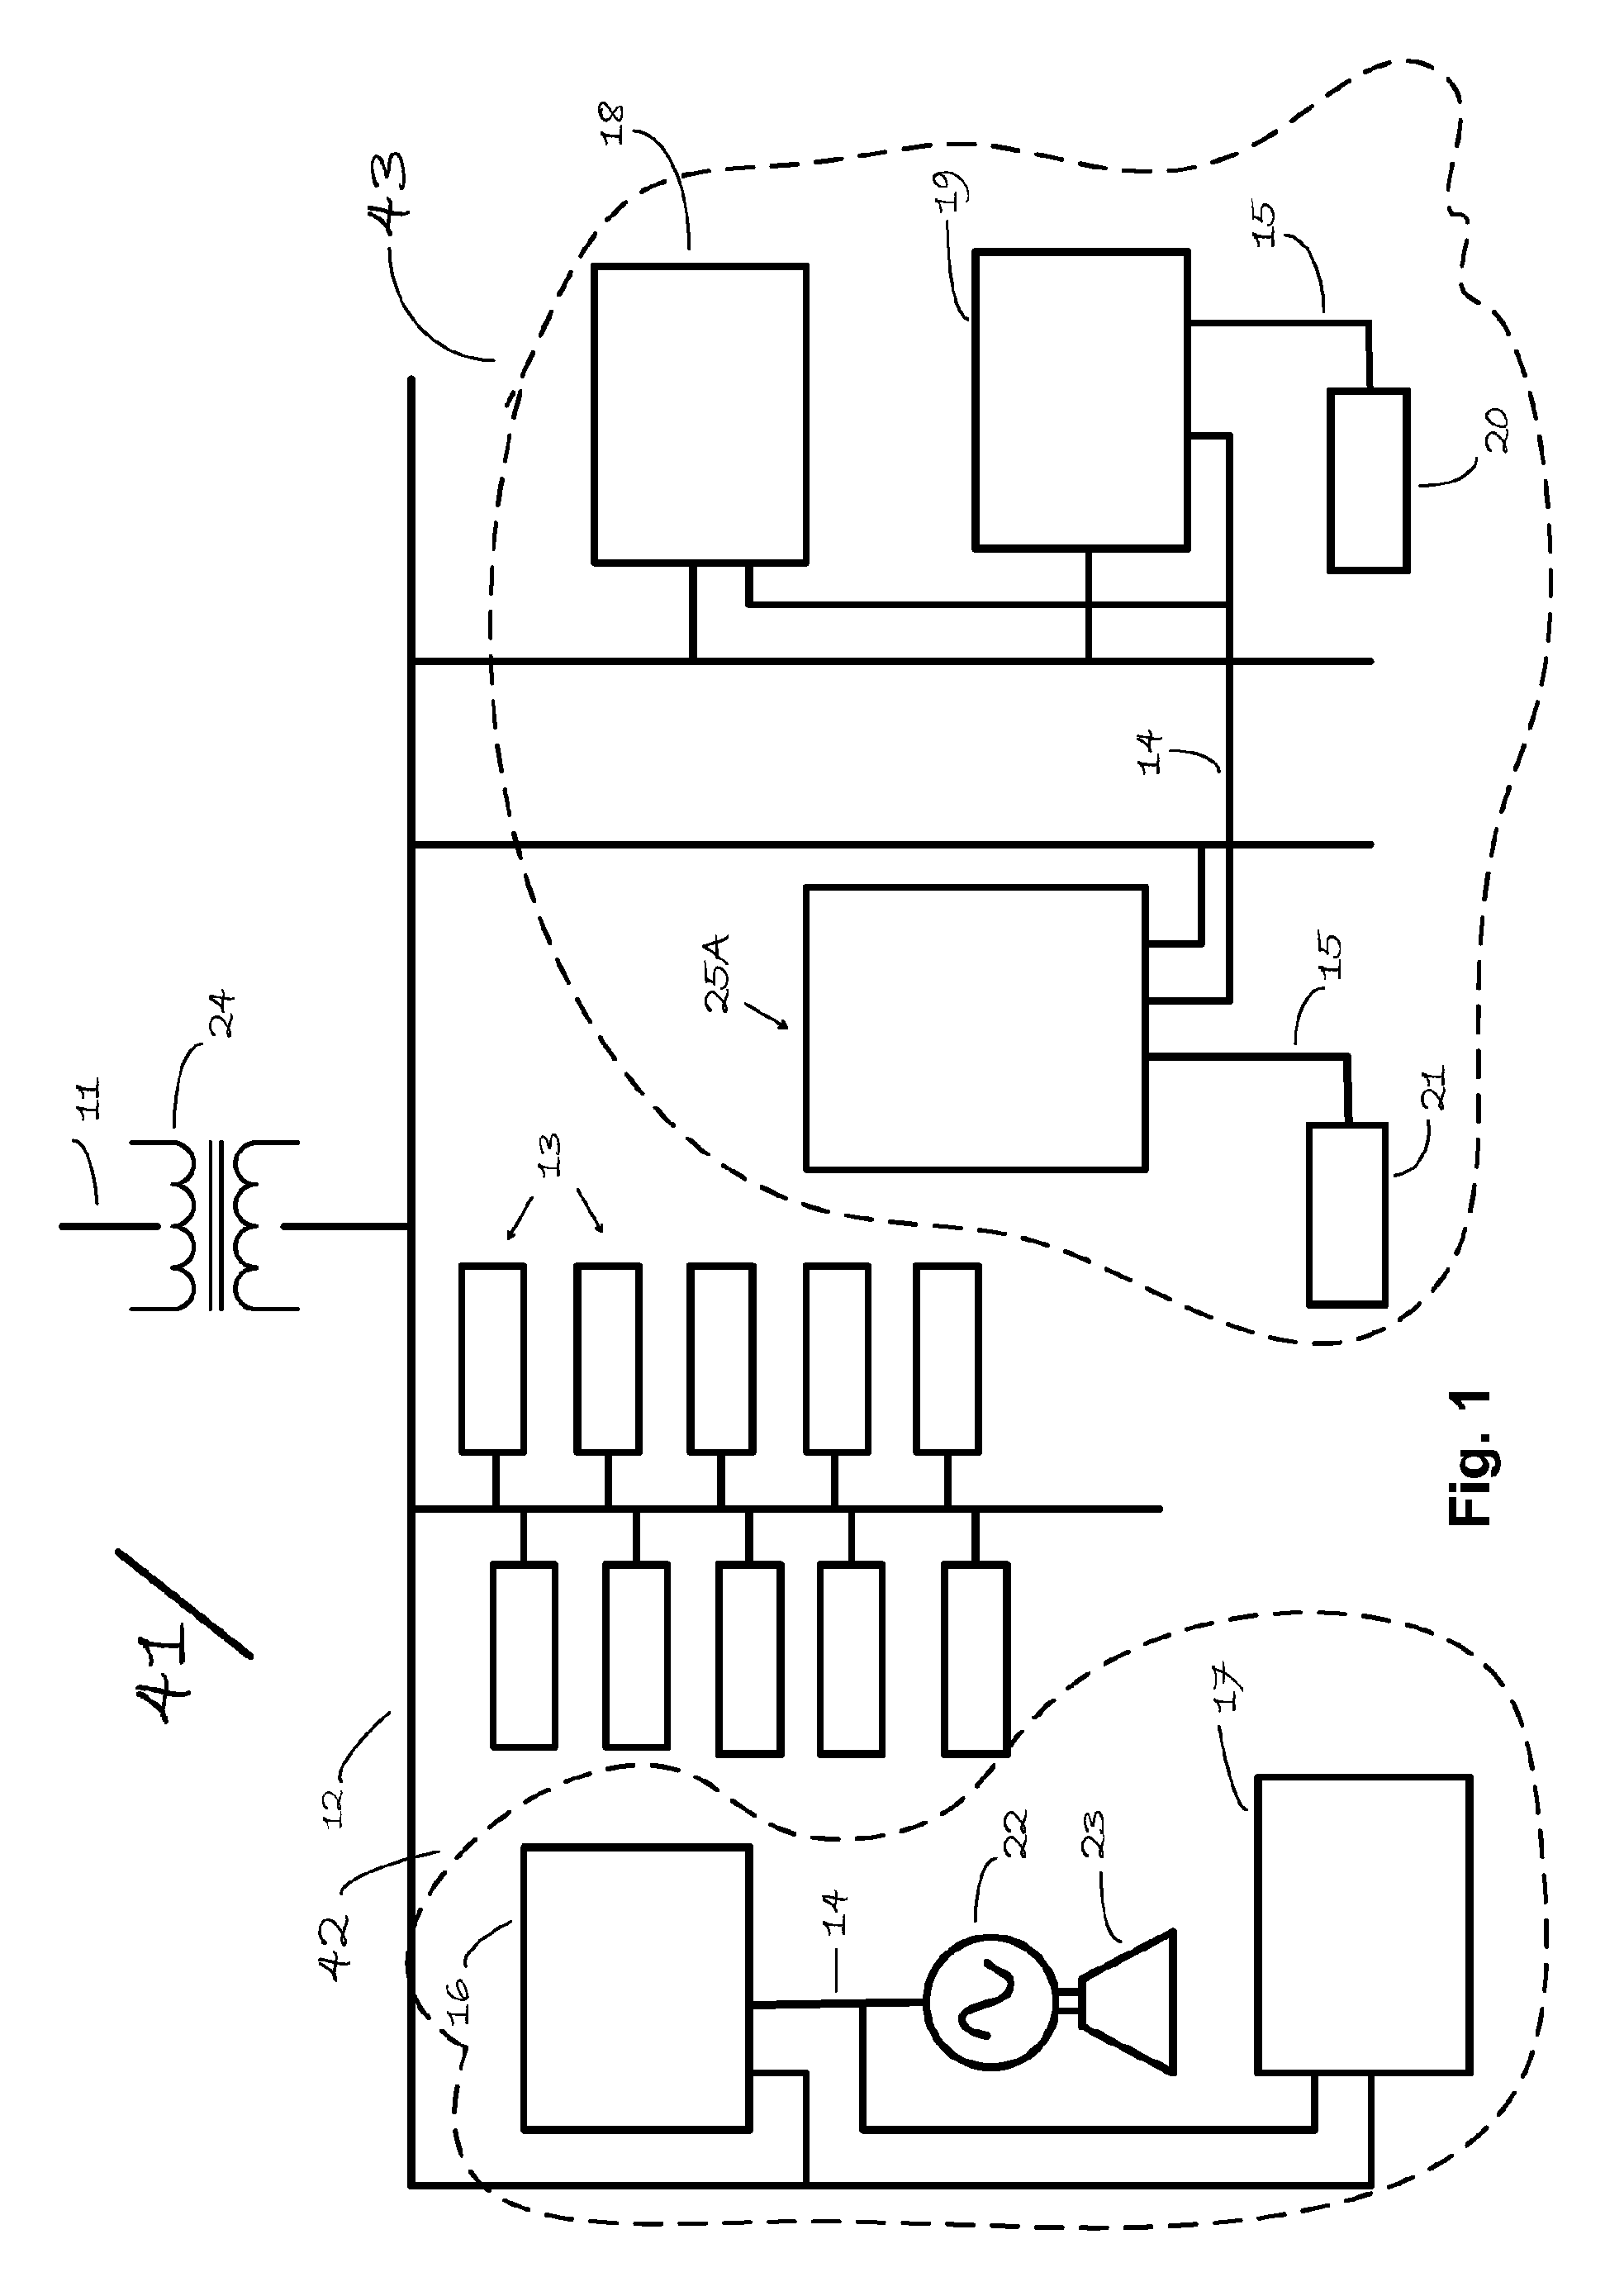 Electric power distribution methods and apparatus